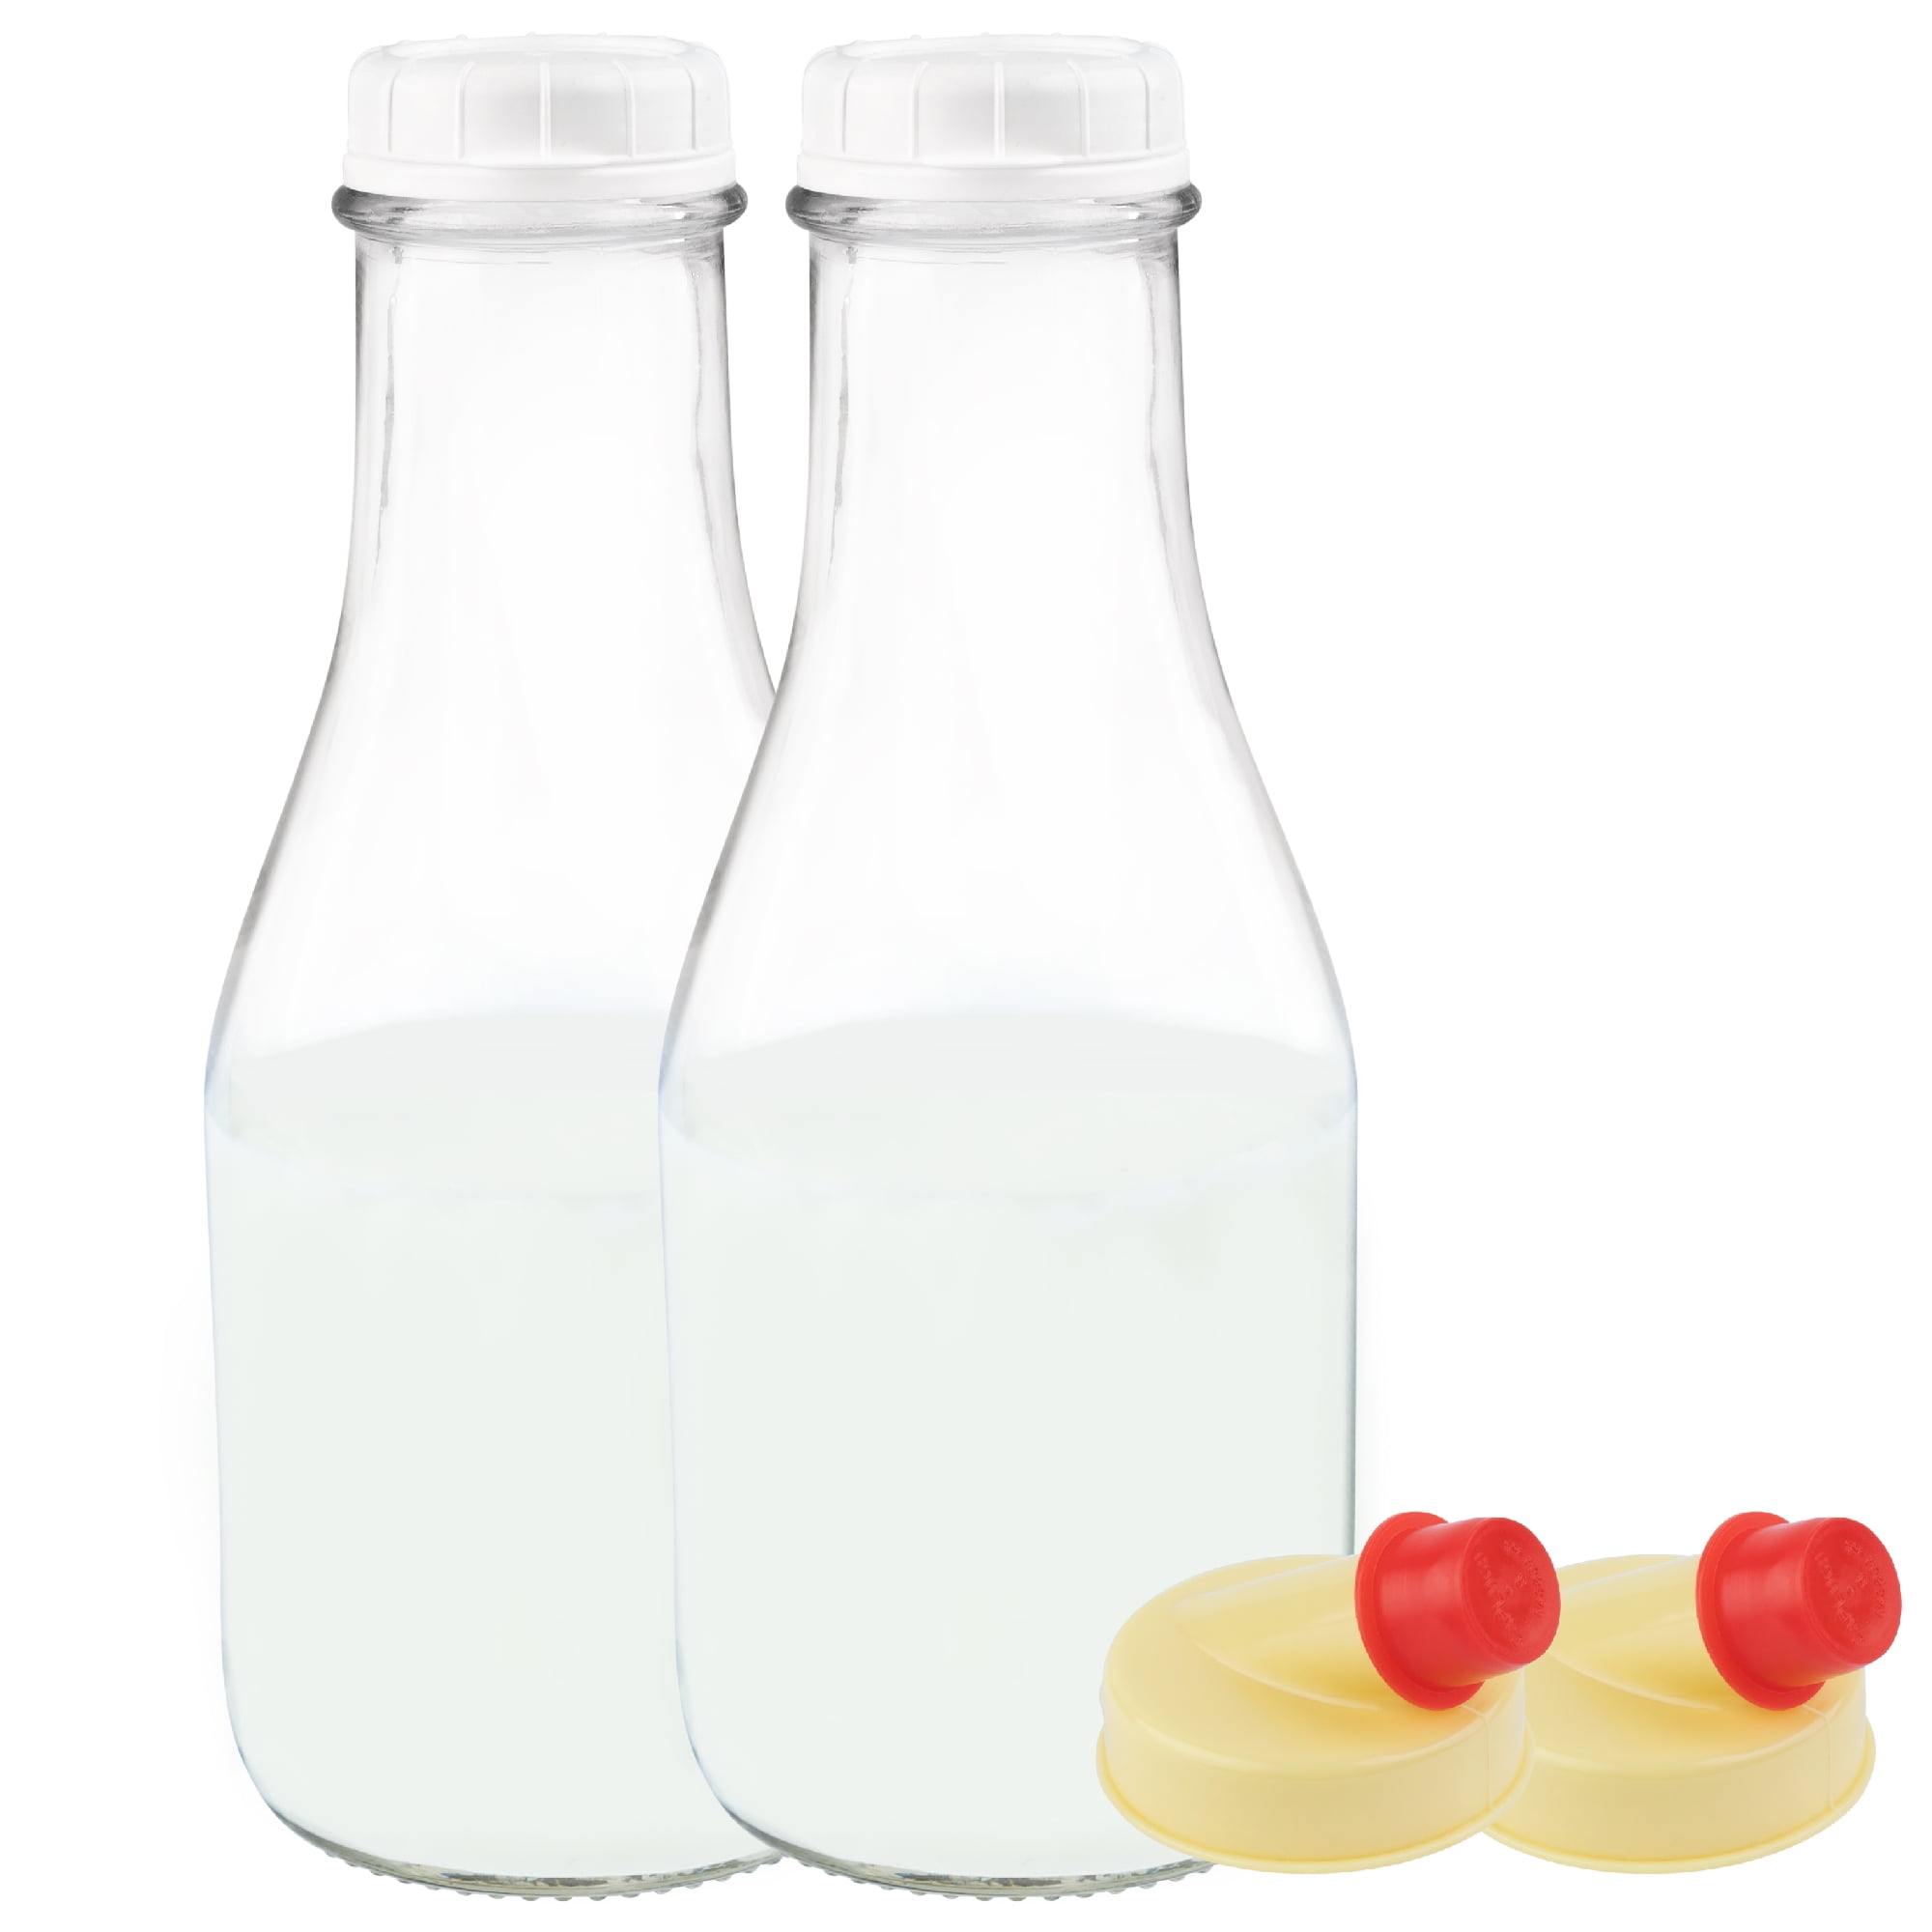 64oz Clear Glass Milk Bottles (Cap Not Included) - 9/Case, Clear Type III 48 mm